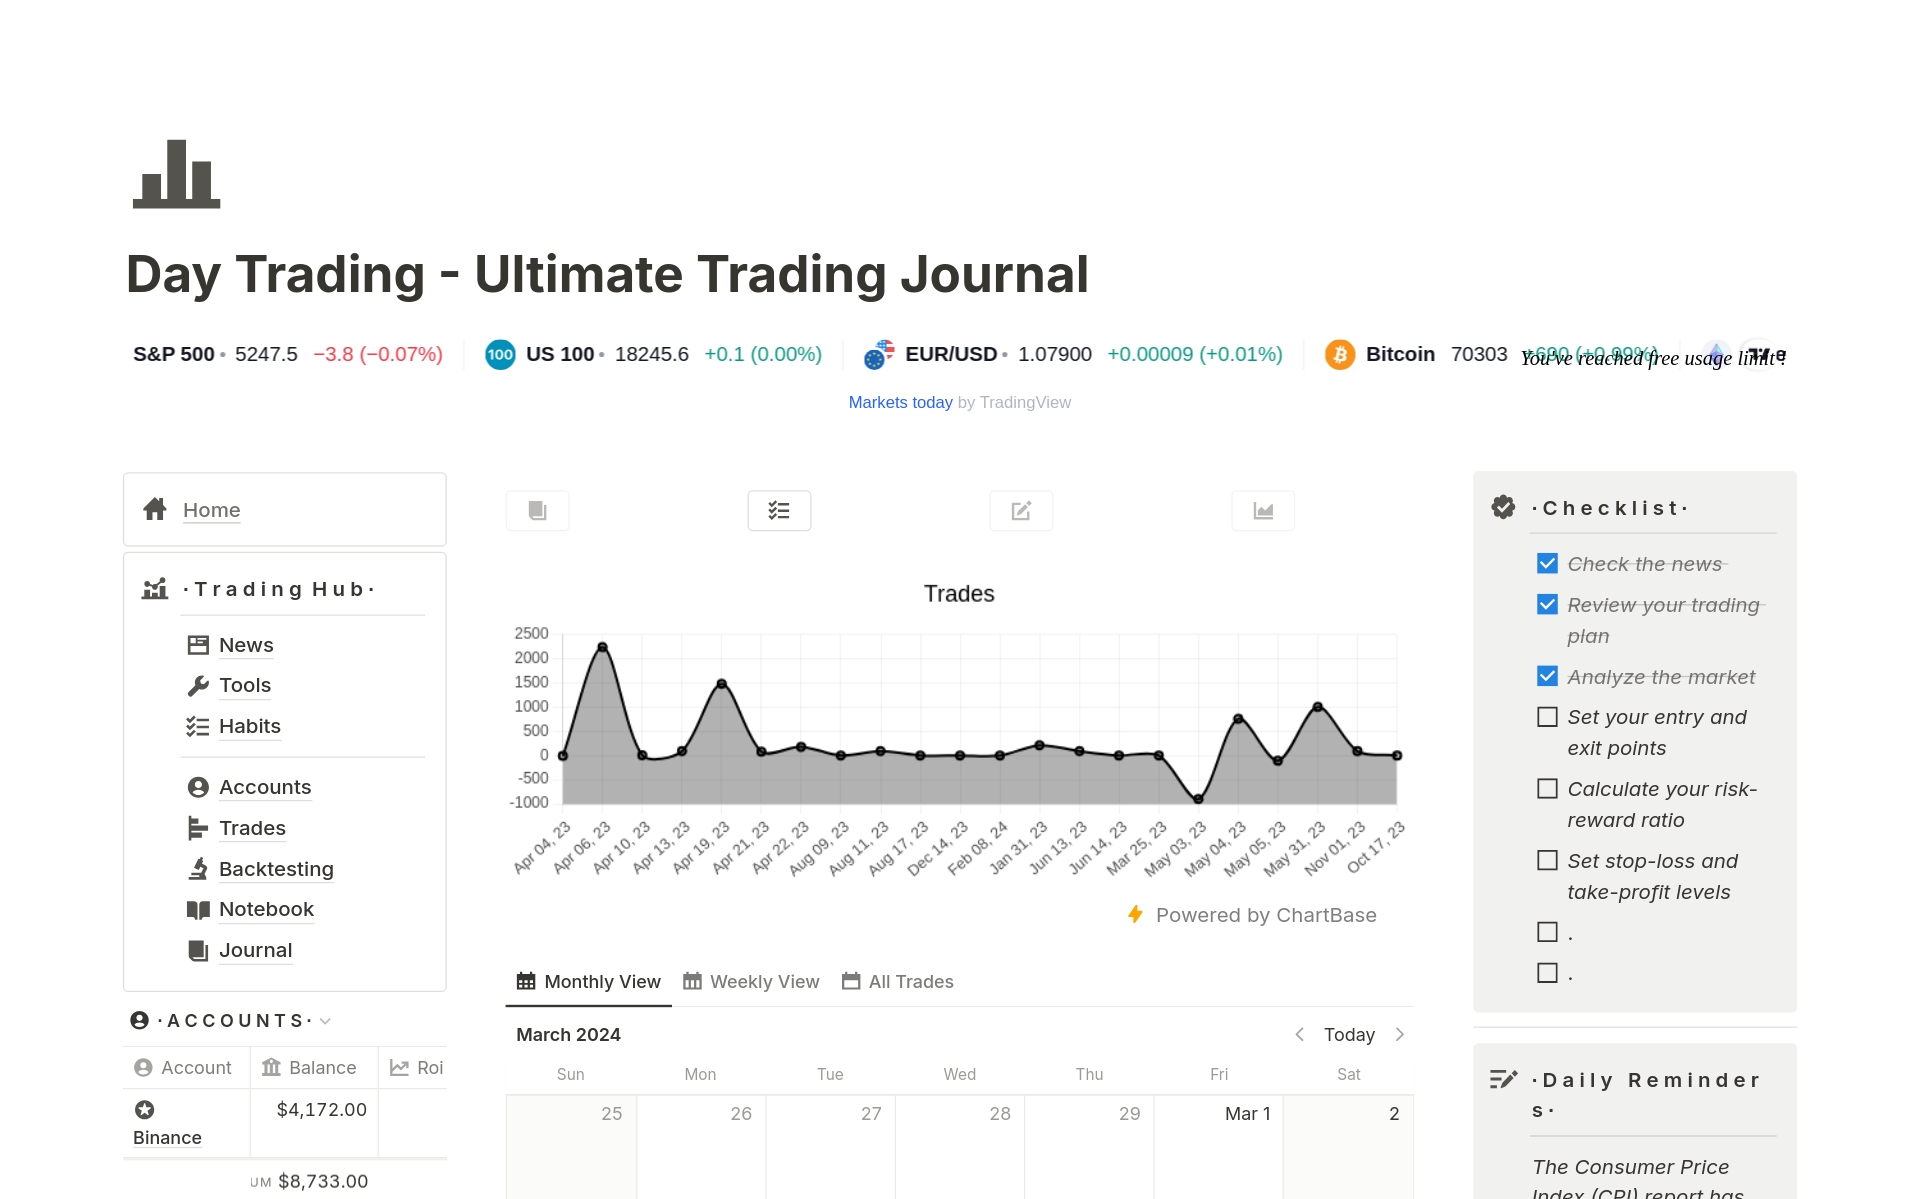 Day Trading - Ultimate Trading Journal For Tradersのテンプレートのプレビュー